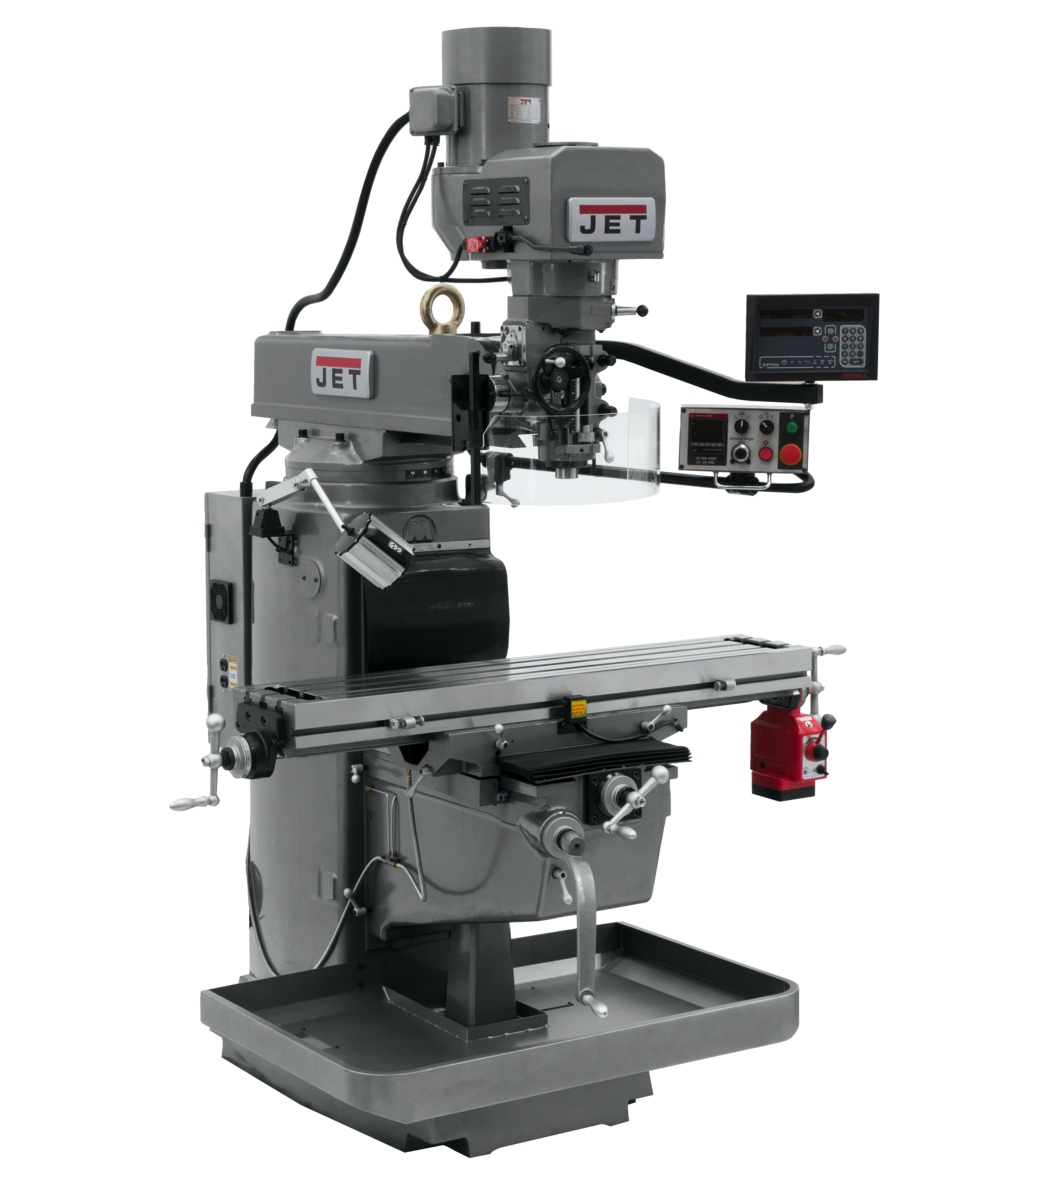 JTM-1050EVS2/230 Mill With 3-Axis Newall DP700 DRO (Knee) With X-Axis Powerfeed